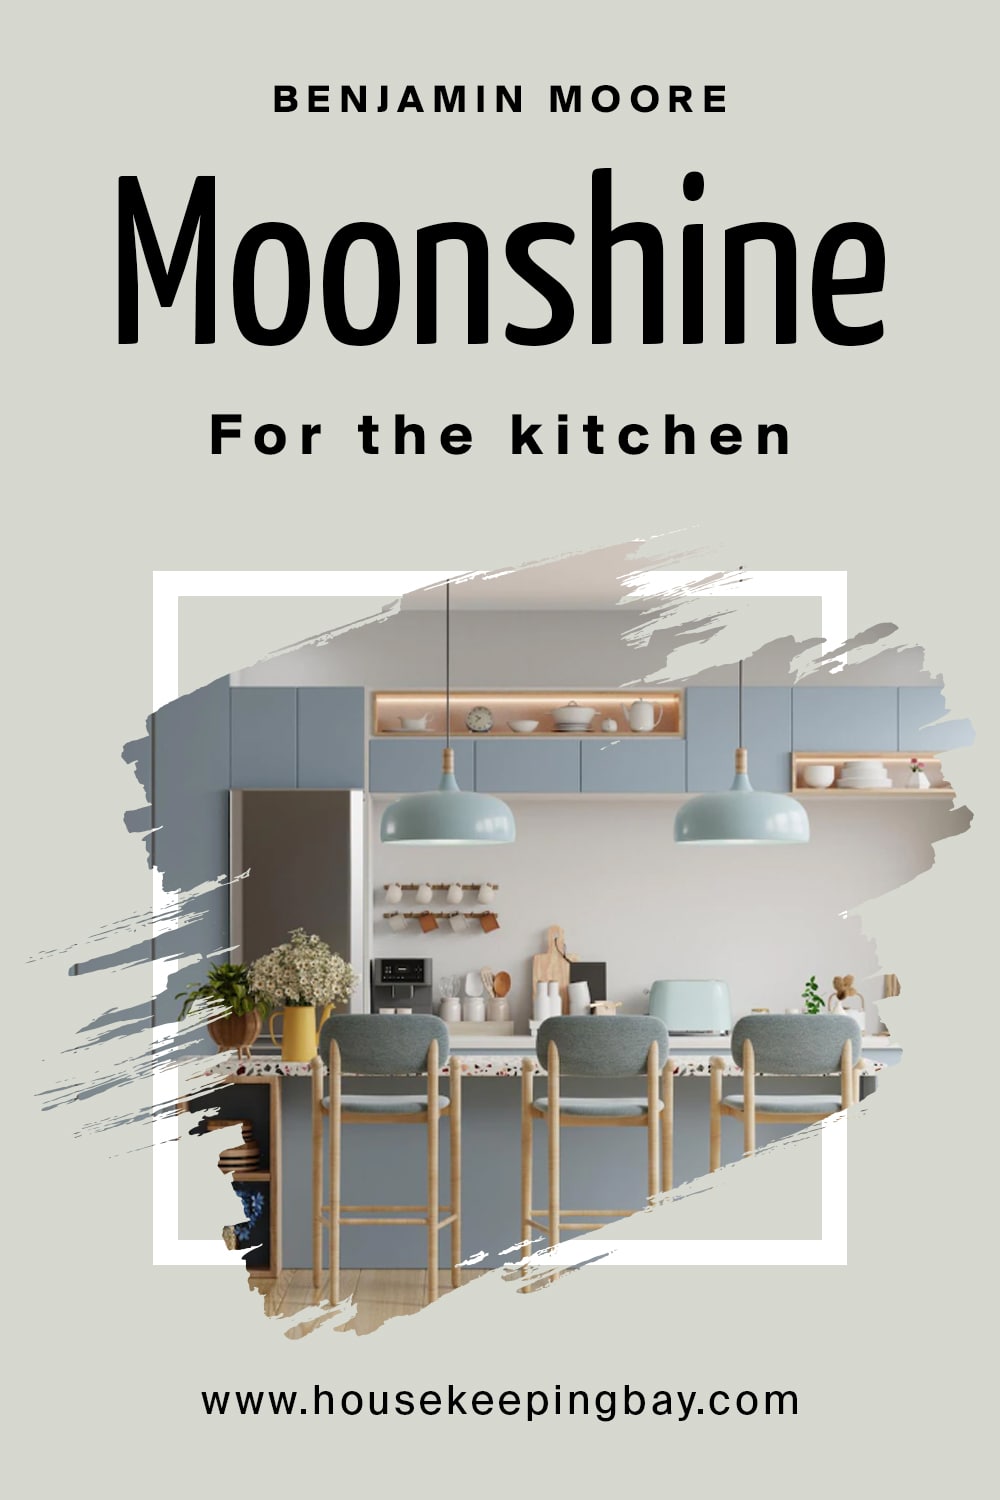 Benjamin Moore. Moonshine for the kitchen